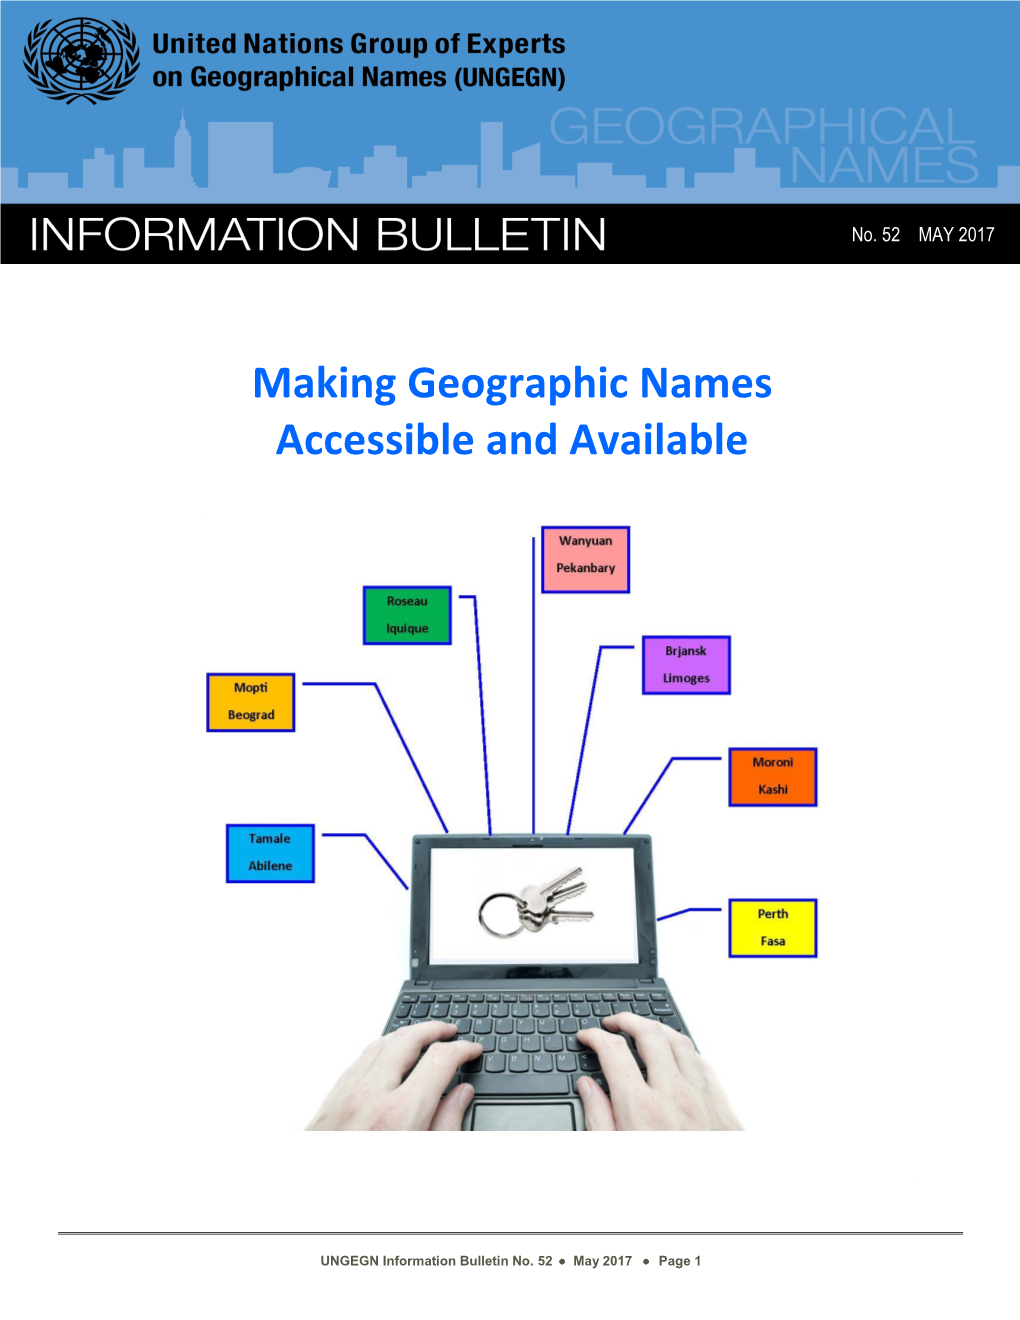 Making Geographic Names Accessible and Available